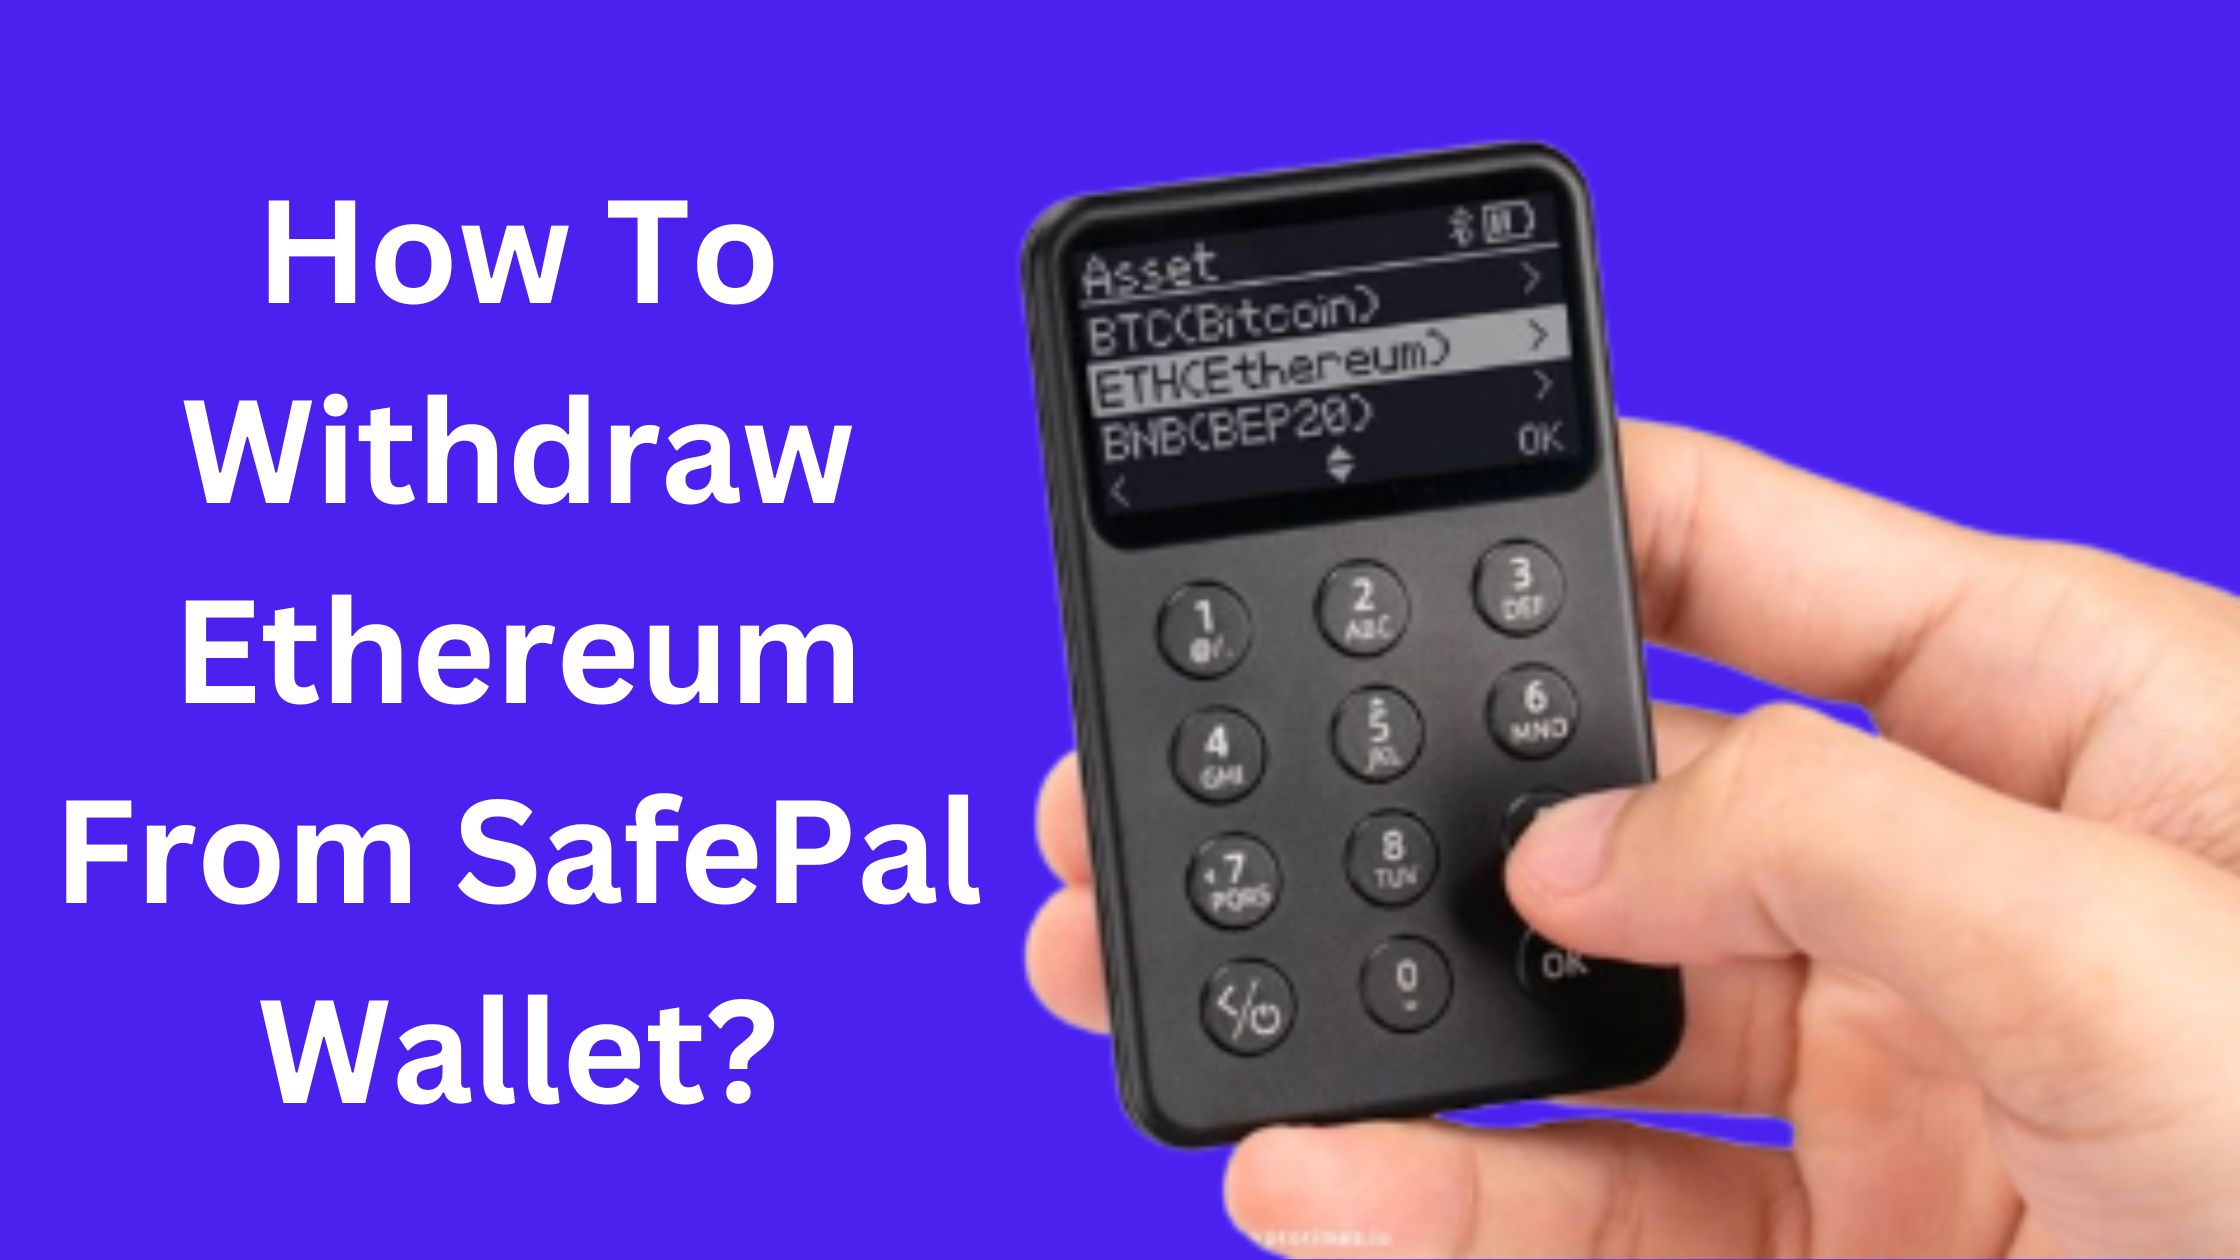 How To Withdraw Ethereum From SafePal Wallet?